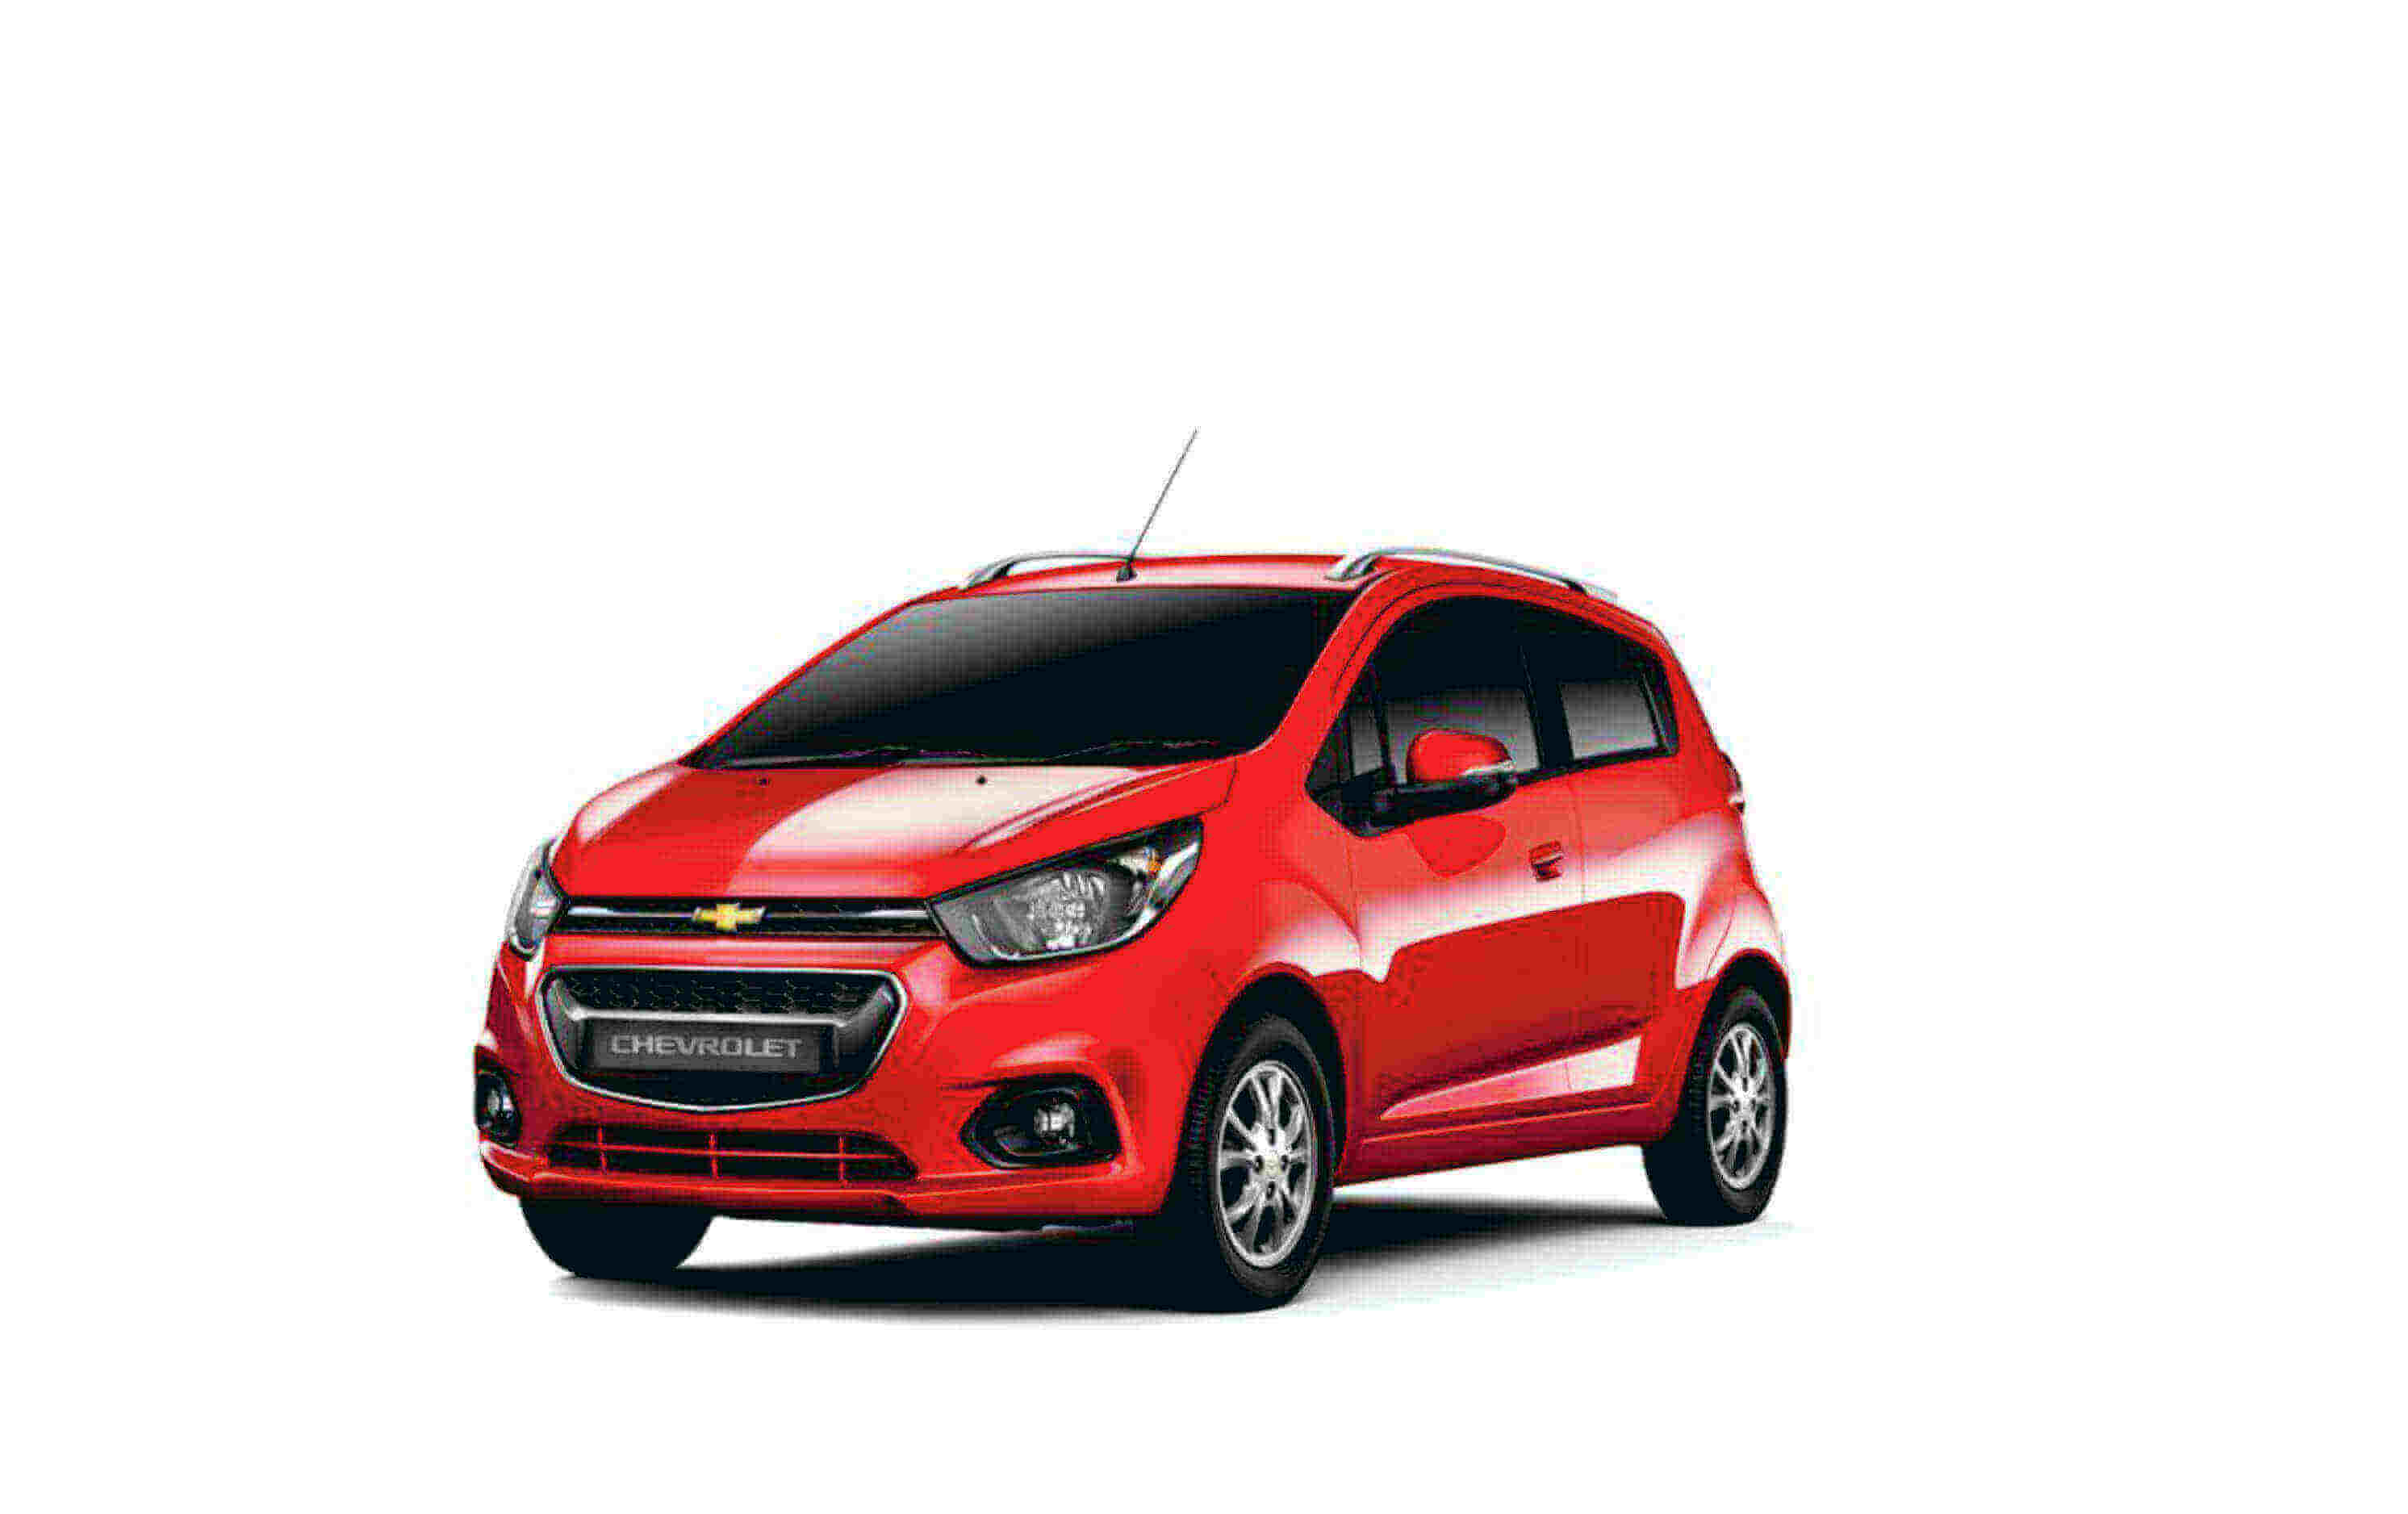 2022 Chevrolet Spark Prices Reviews and Photos  MotorTrend